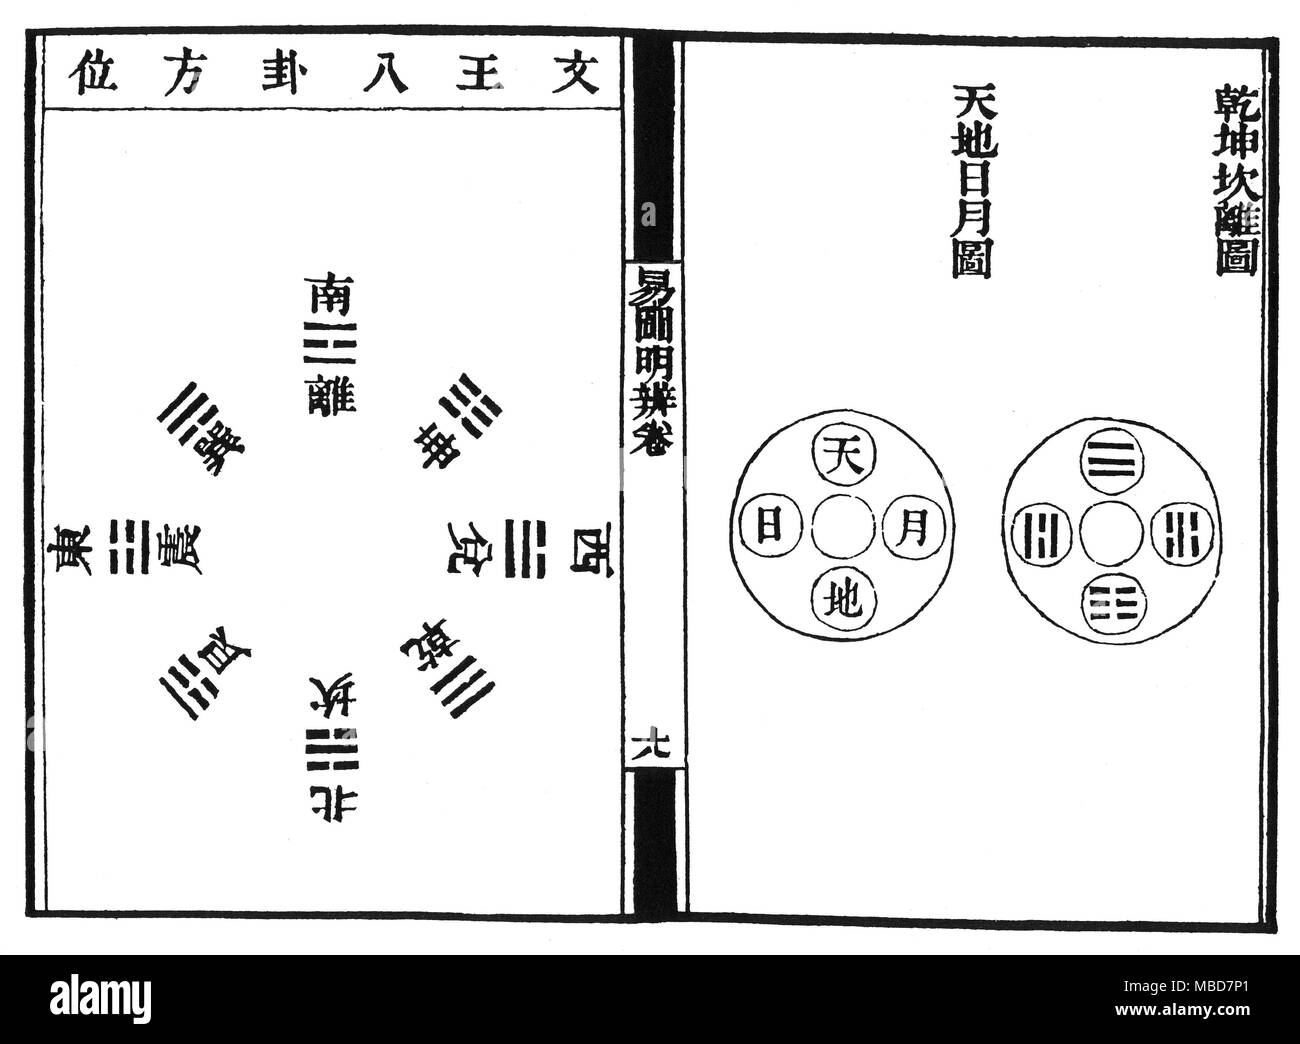 I CHING - TRIGRAMS A double page spread from an 18th century block-book version of the Book of Changes, or I Ching. The two diagrams on these pages represent the most ancient diagrams depicting the order of the eight trigrams, and their cosmic equivalents. The arrangement to the right (the first page in the Chinese system) illustrates the arrangement as set out by King Wen. This visualizes the South at the top, with the warm and brilliant trigram Li. Opposite is the North, with the cold trigram K'an. From Li, in clockwise order, are the trigrams Kun, Tui, Chien, K'an, Ken, Chen and Sun Stock Photo